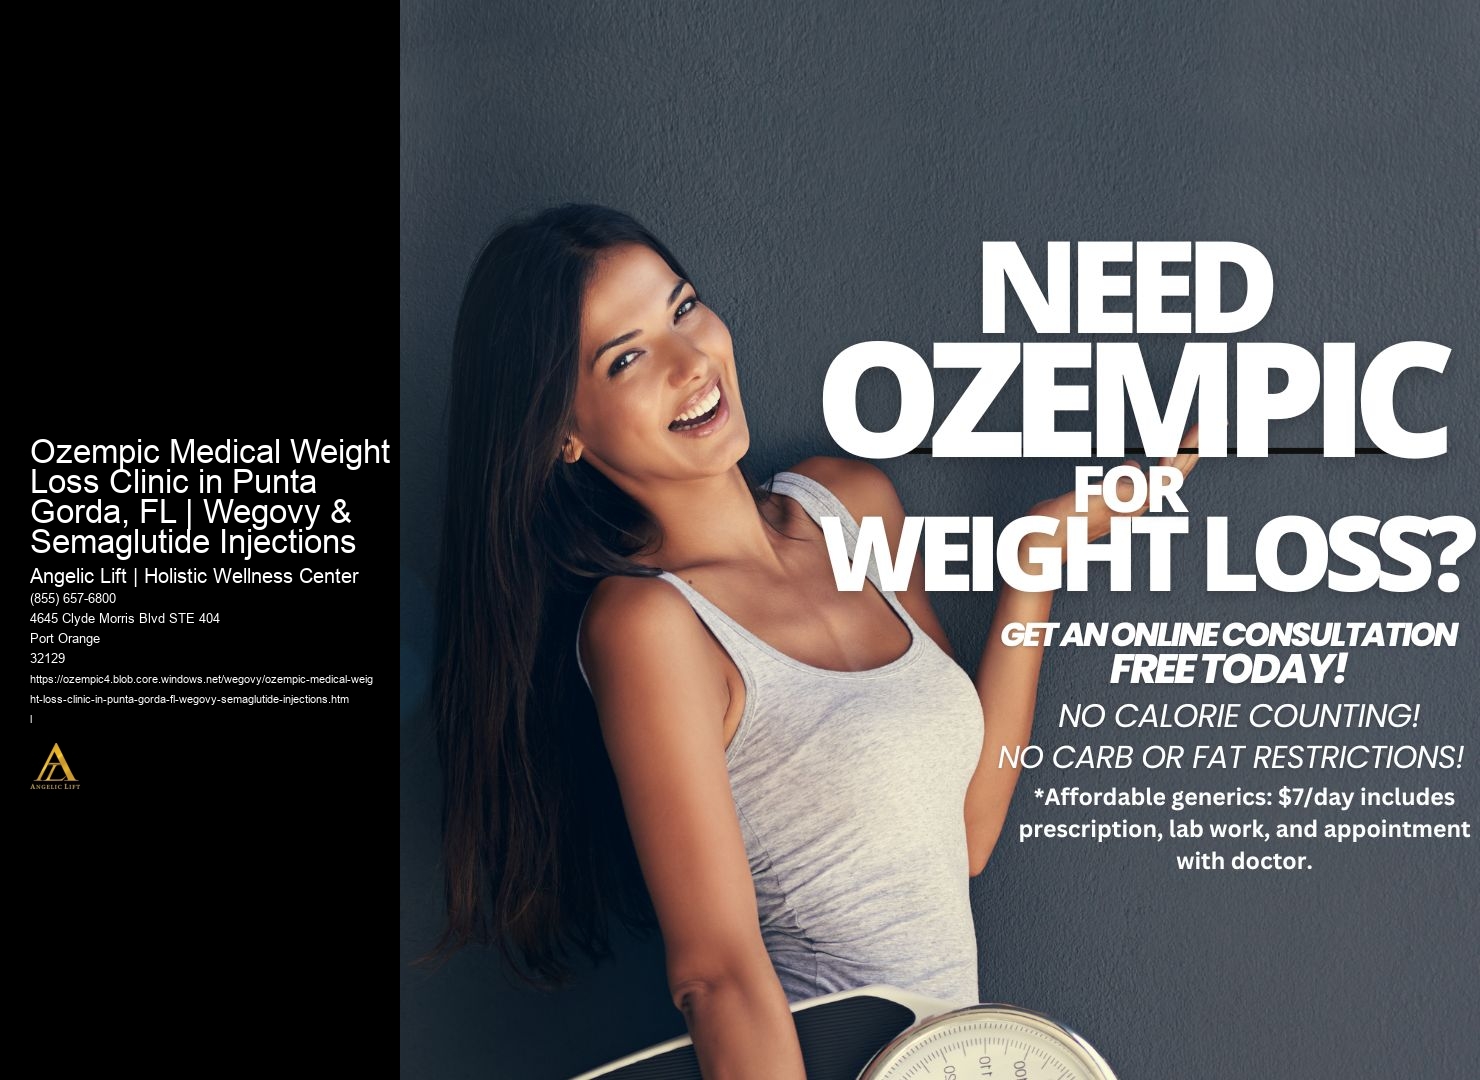 Ozempic Medical Weight Loss Clinic in Punta Gorda, FL | Wegovy & Semaglutide Injections